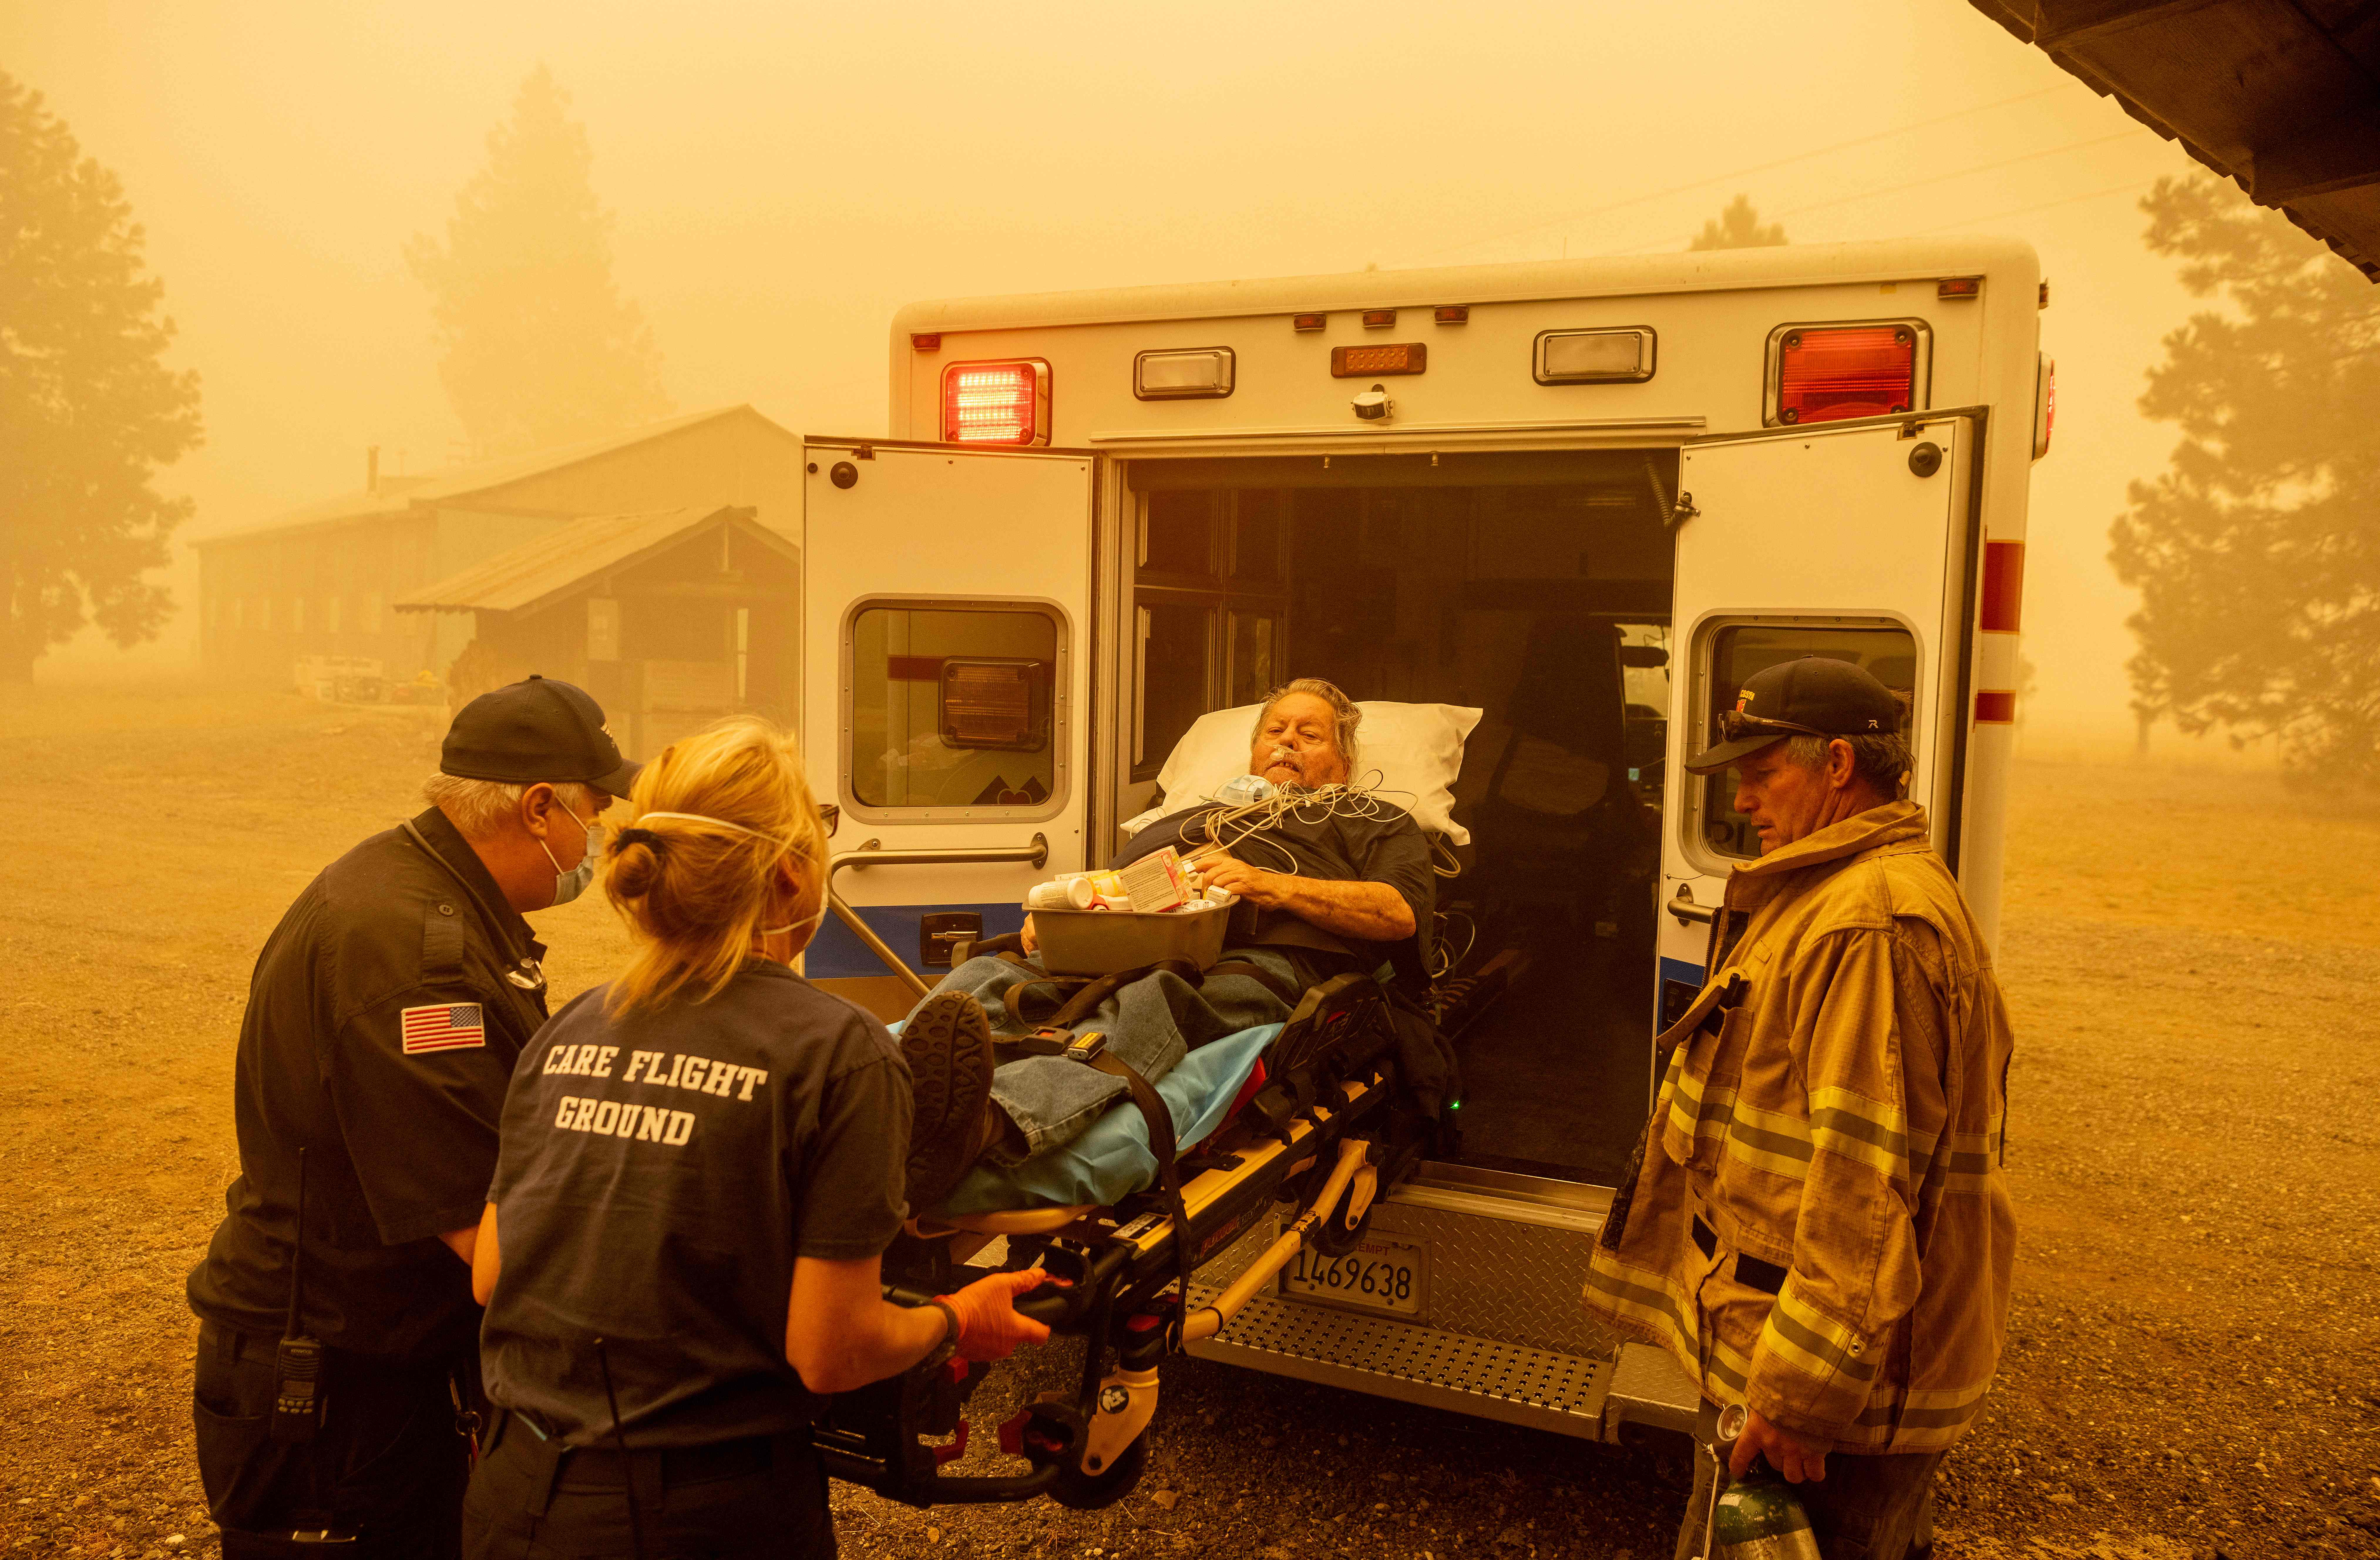 A man on a gurney is rushed into an ambulance by EMTs, with voluminous smoke and orange-tinted air from wildfires surrounding them.